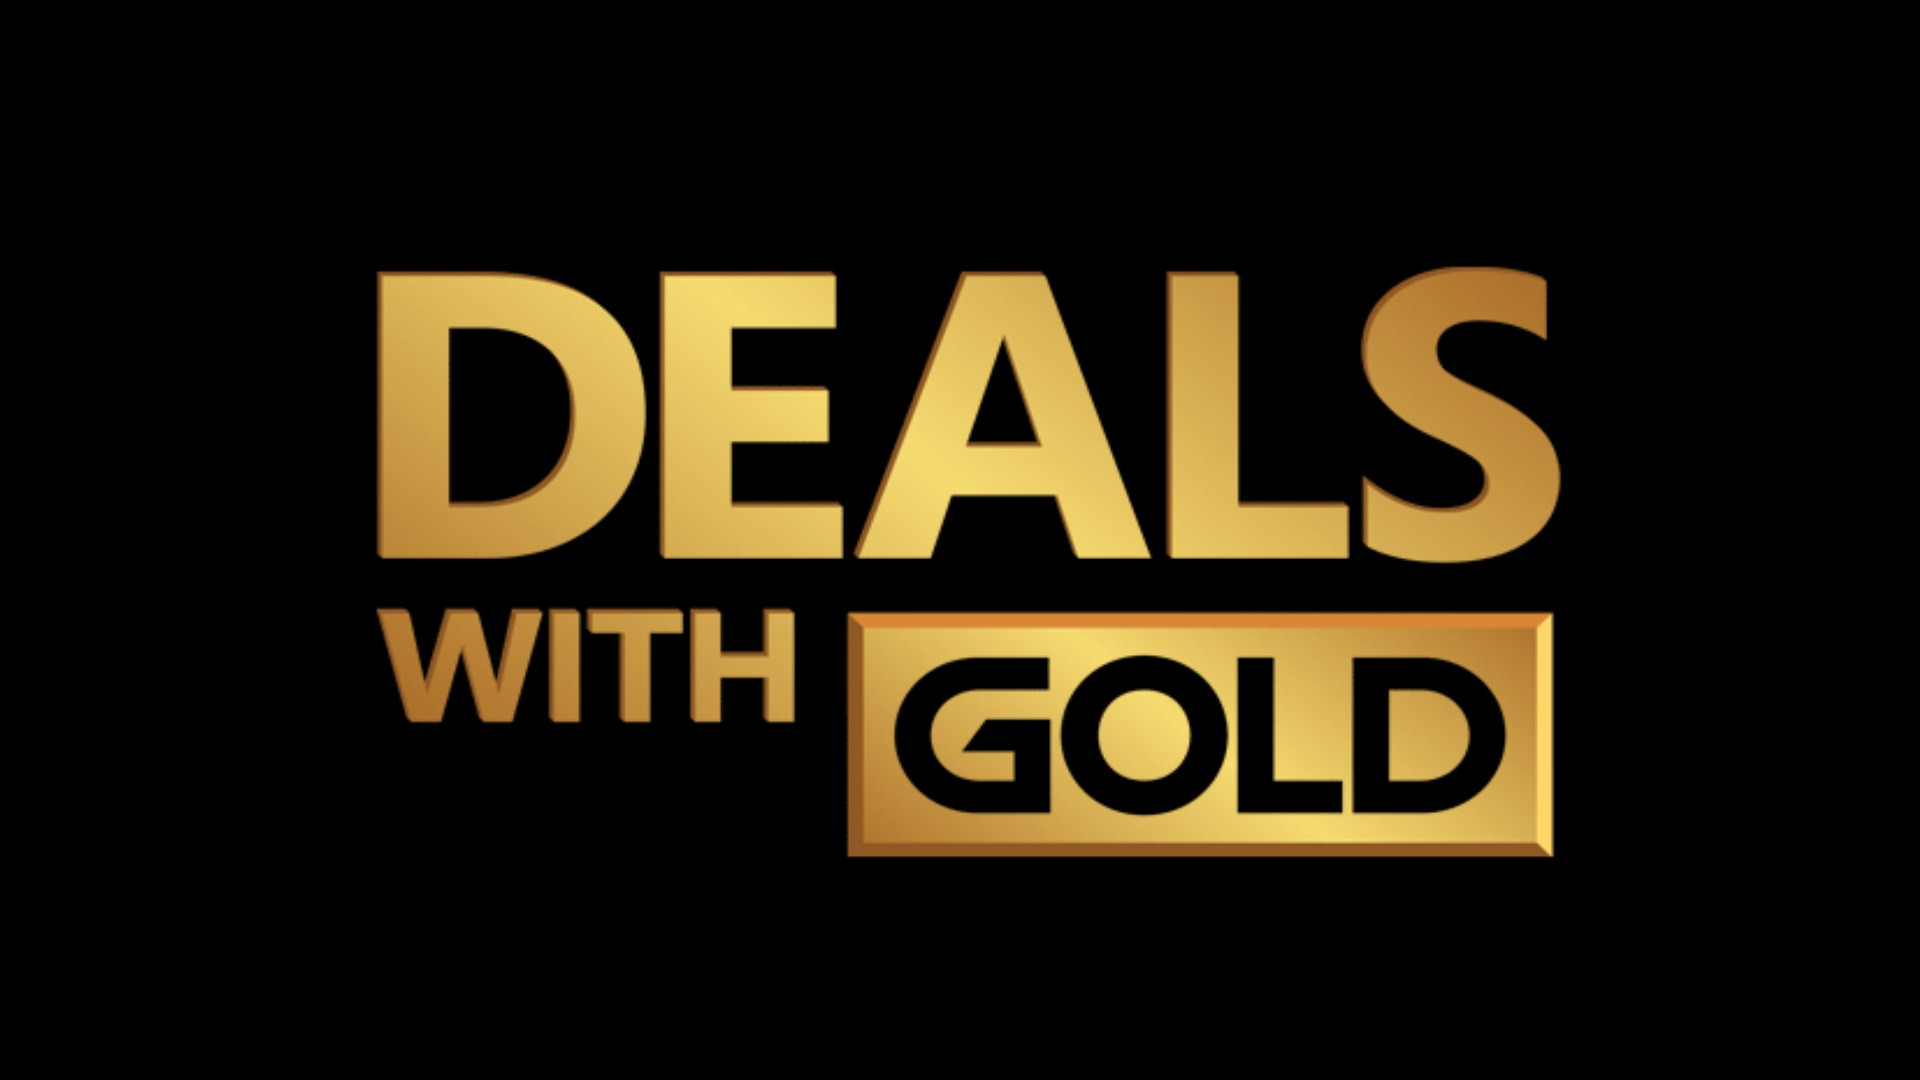 Deals with Gold semaine 50